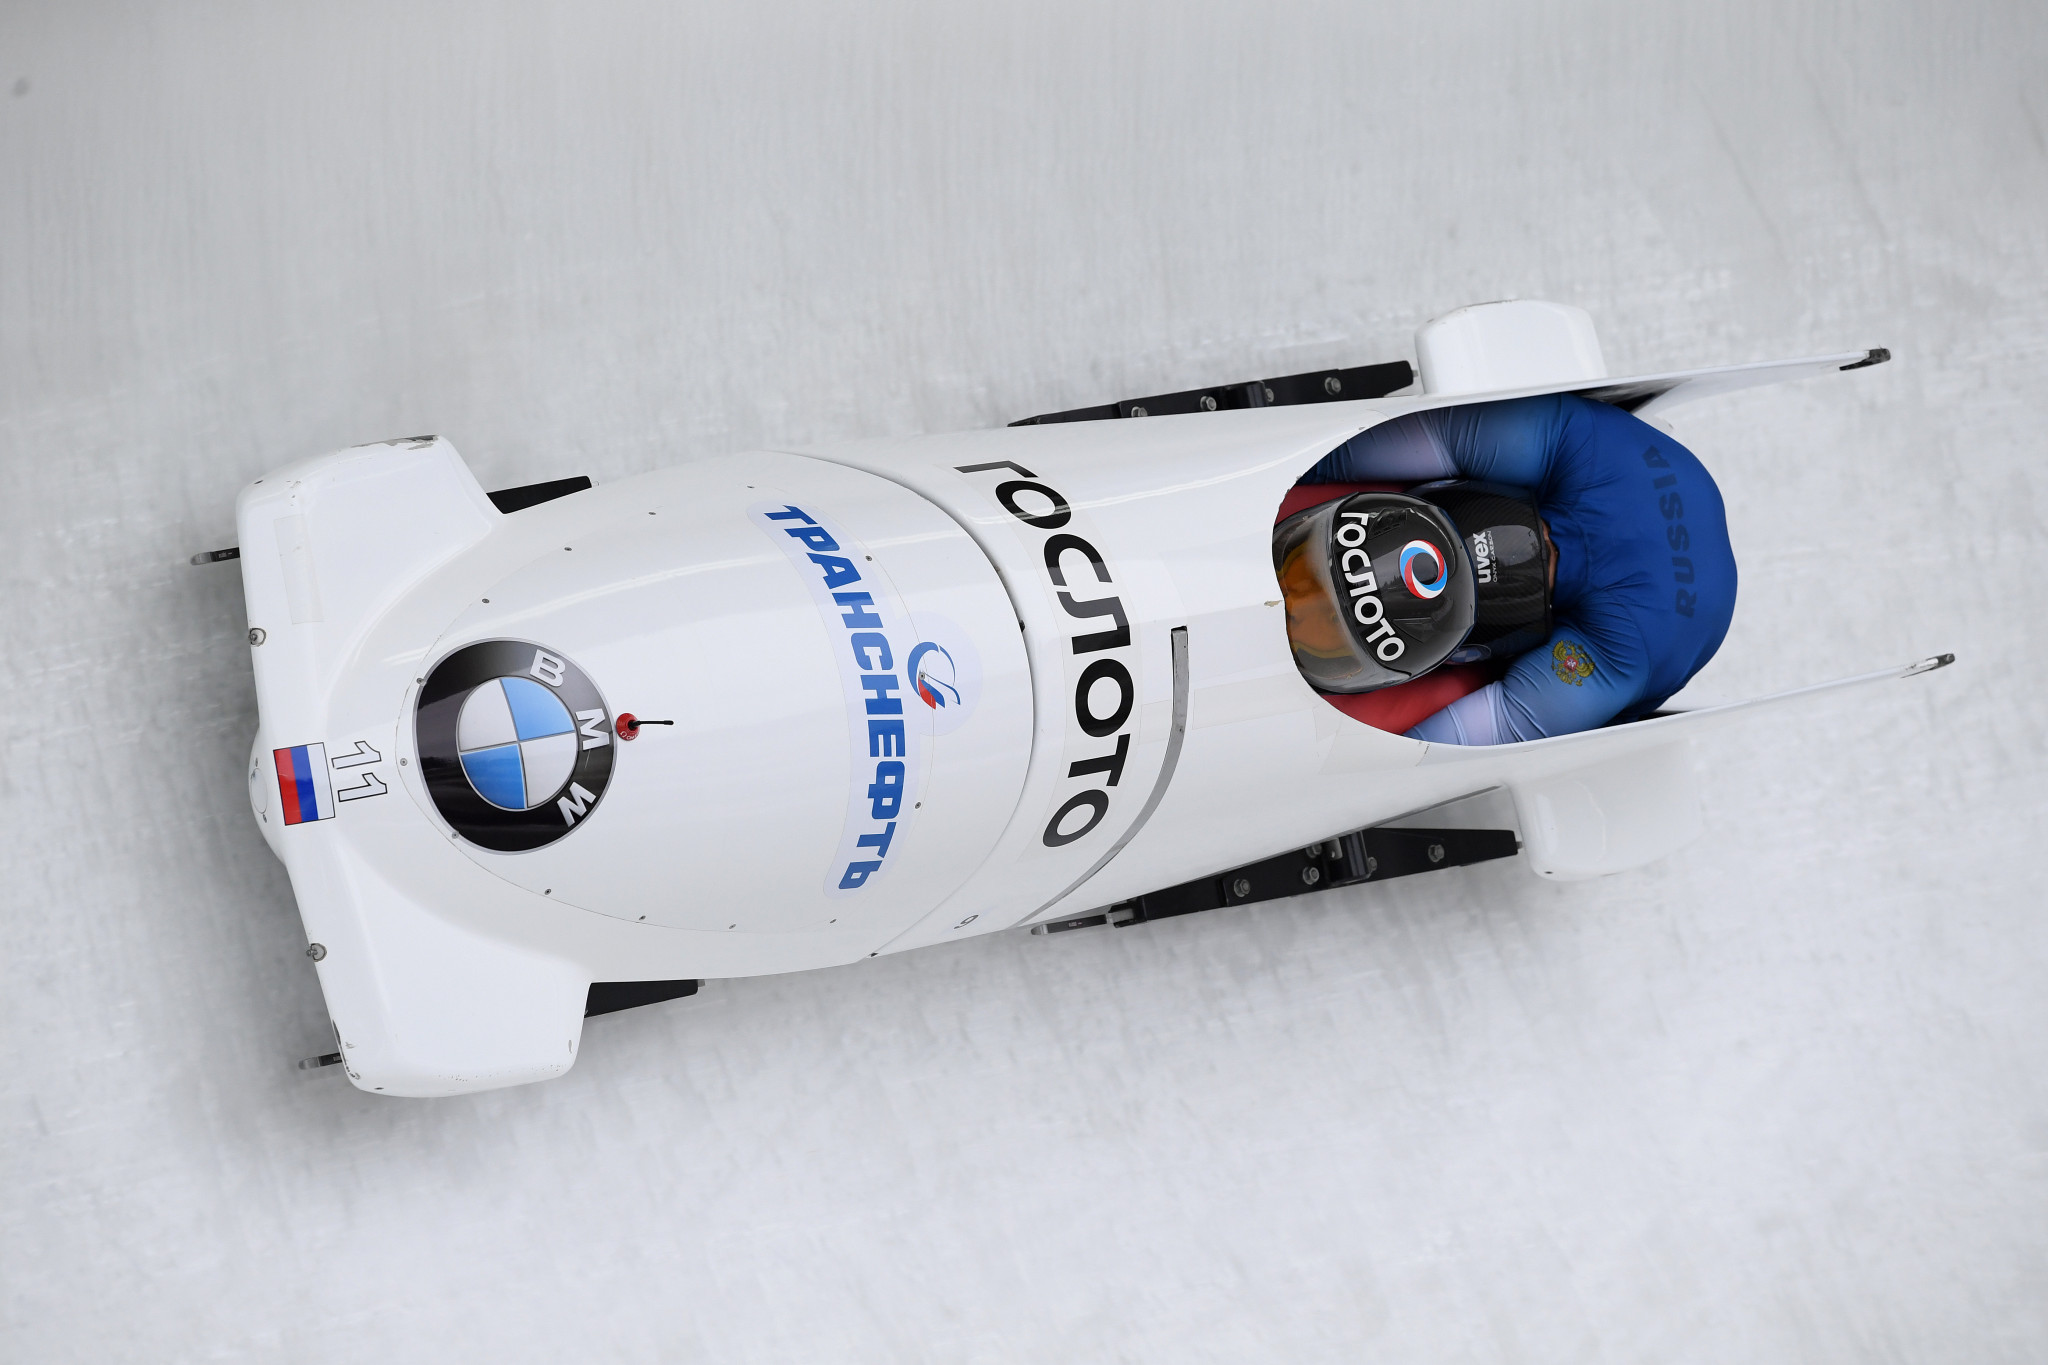 Russian bobsleigh team to miss both Sigulda World Cups after COVID-19 outbreak